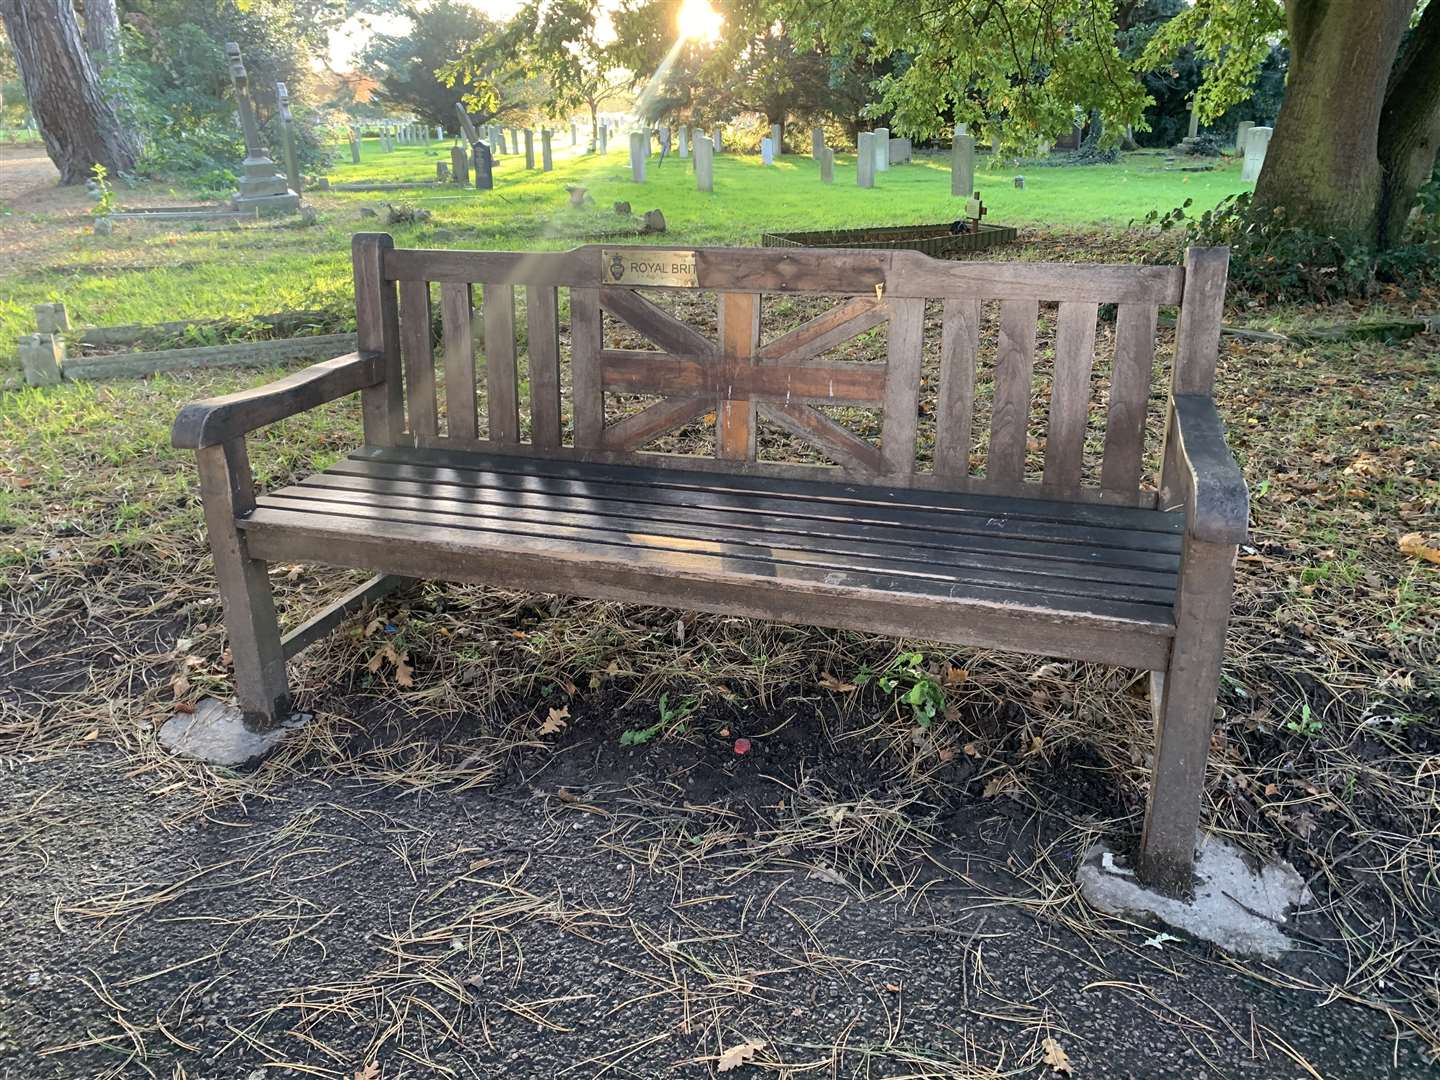 The Royal British Legion bench situated next to the war memorial at Hamilton Road cemetery in Deal has been vandalised